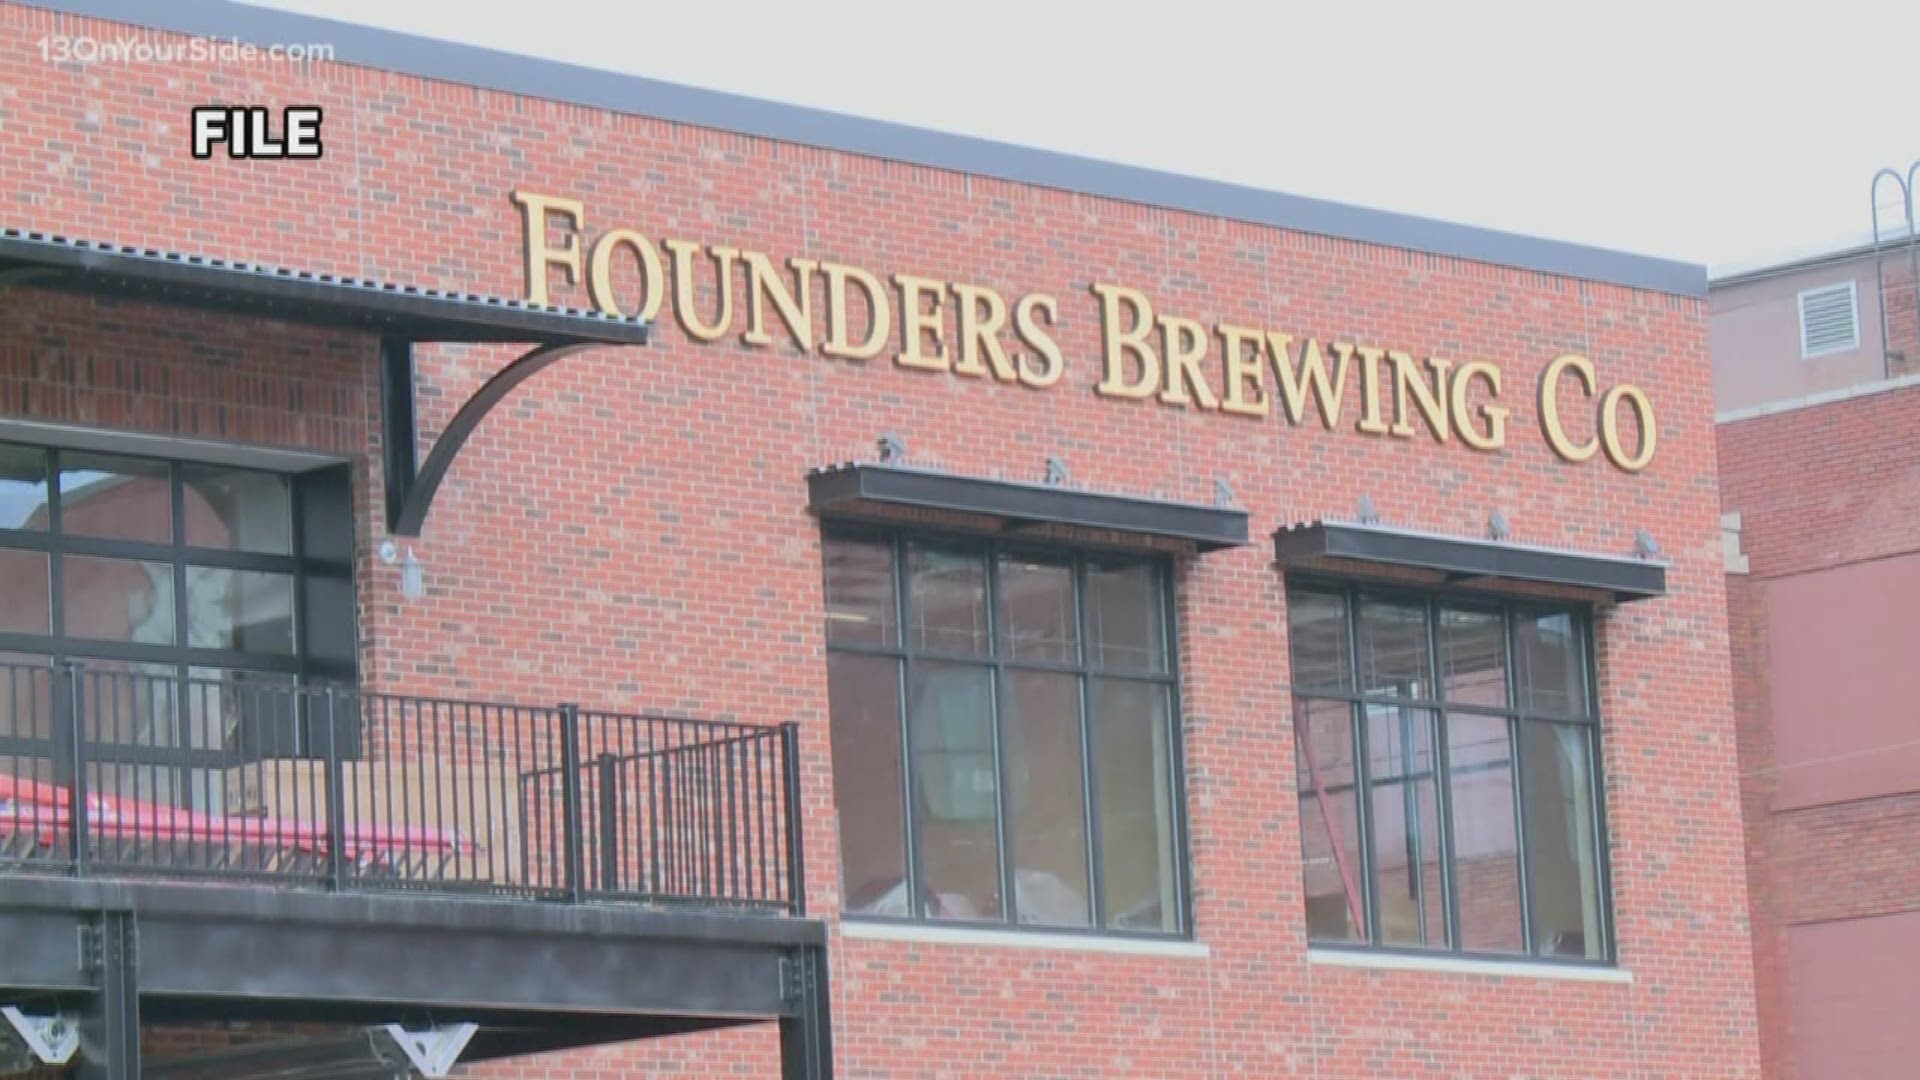 Tracy Evans, who served as an events and promotions manager at Founders in both Grand Rapids and Detroit, filed the case last October in the U.S. District Court.